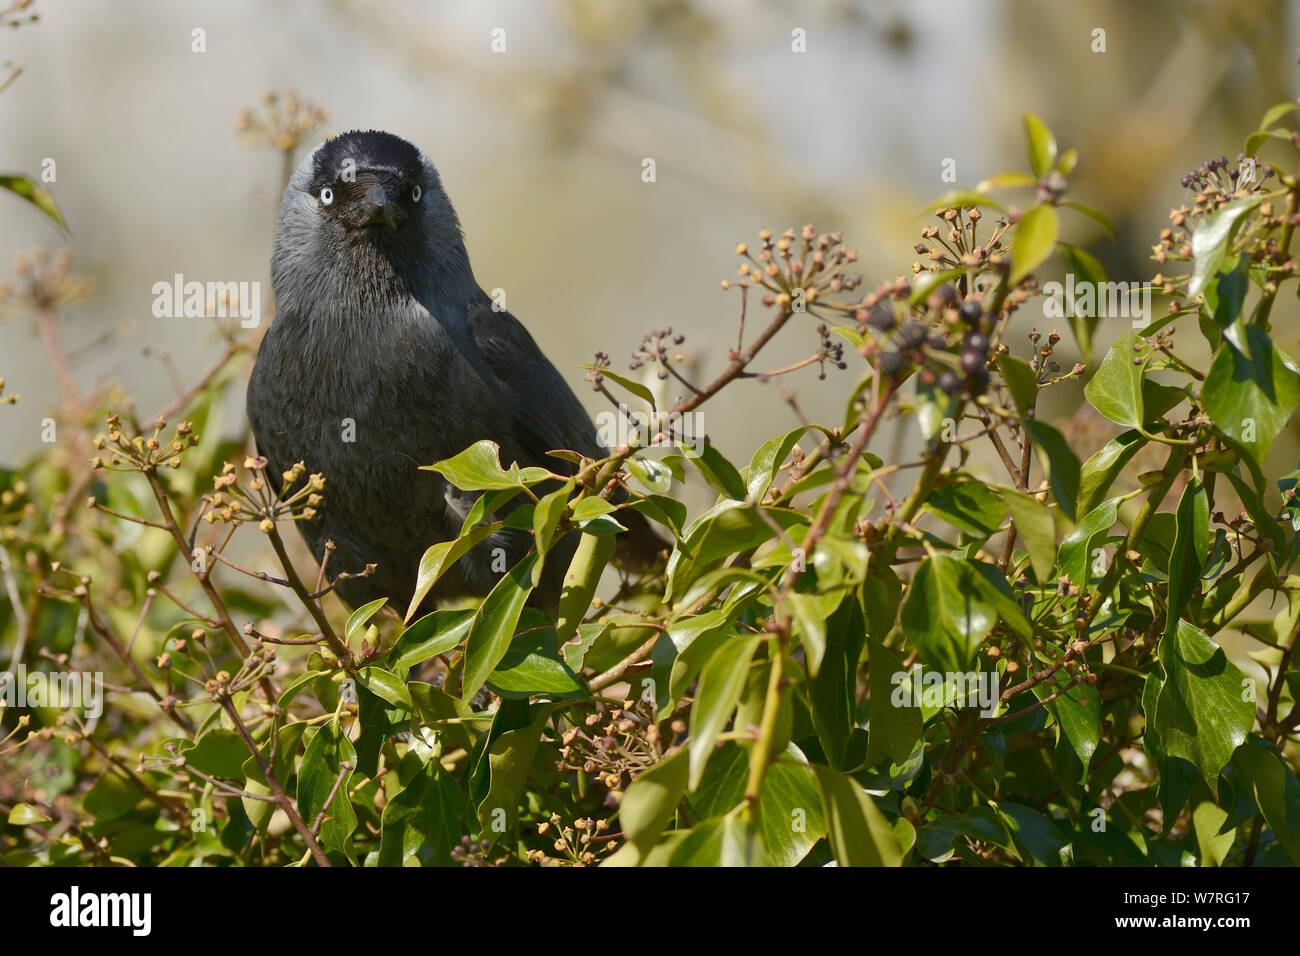 Head-on view of a Jackdaw (Corvus monedula) perched among Ivy (Hedera helix) leaves and berries, Gloucestershire, UK, May. Stock Photo